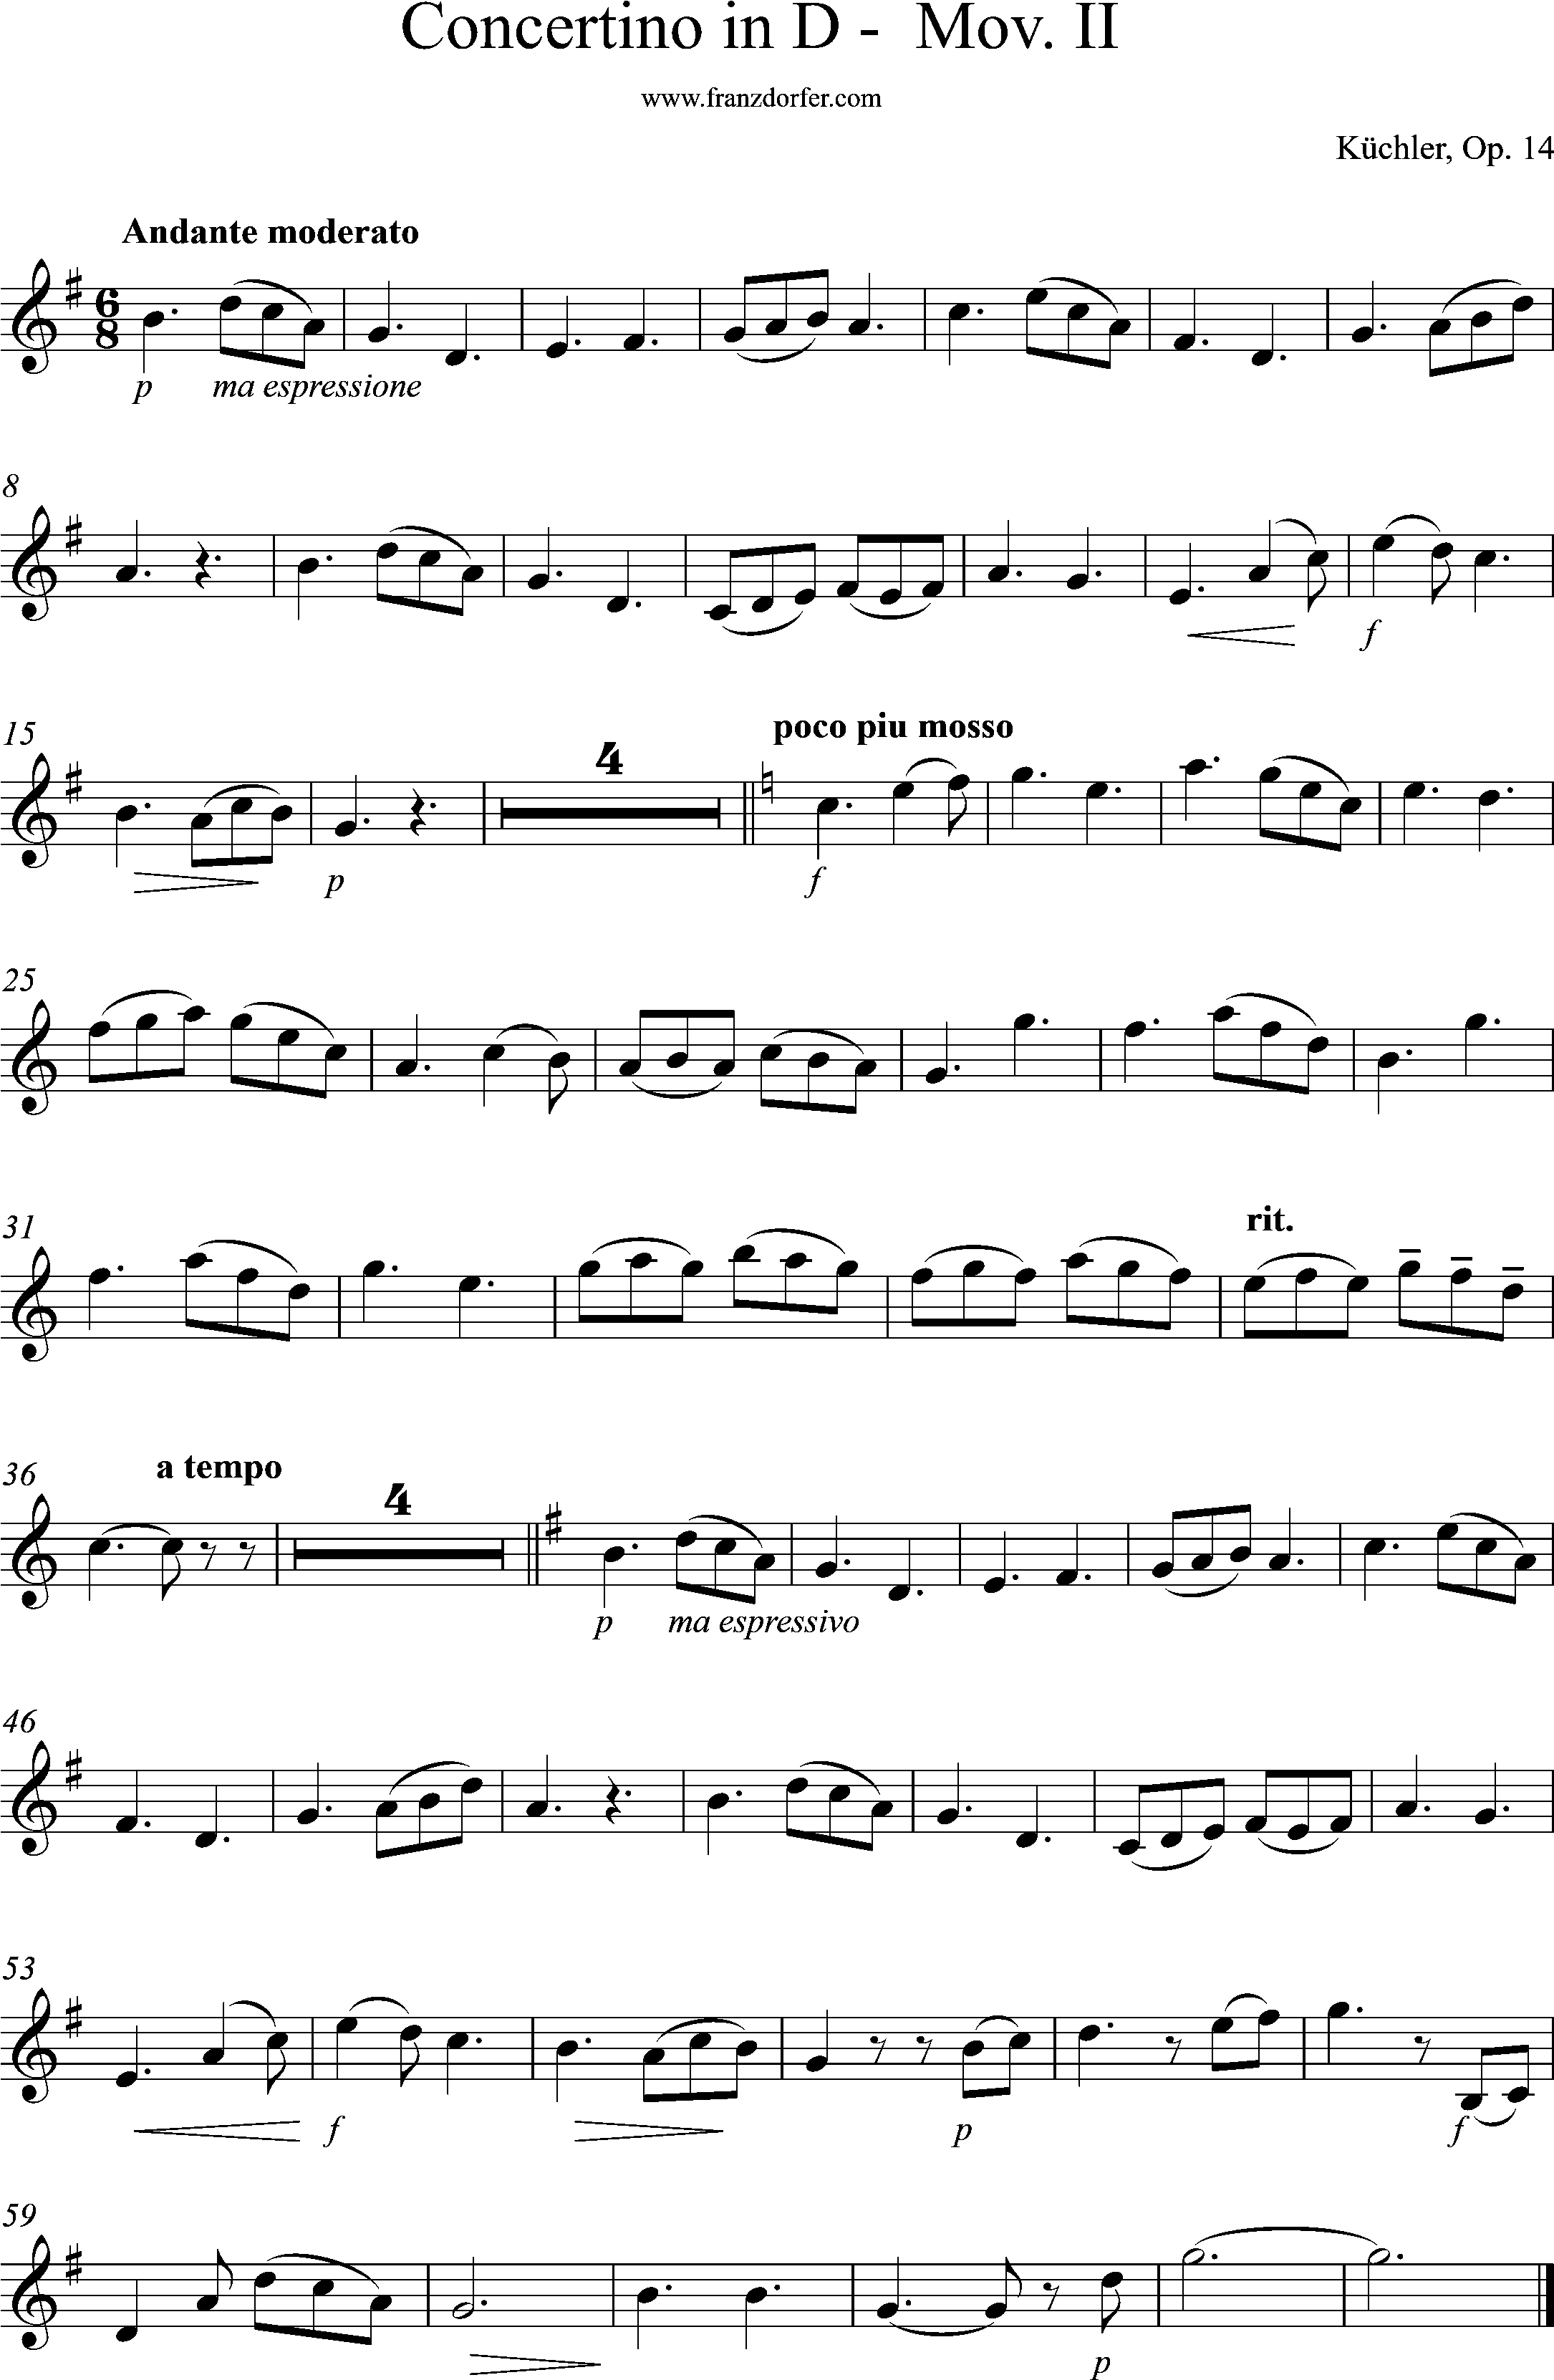 Violine Part sheetmusic, Küchle Op. 14, Andante moderato